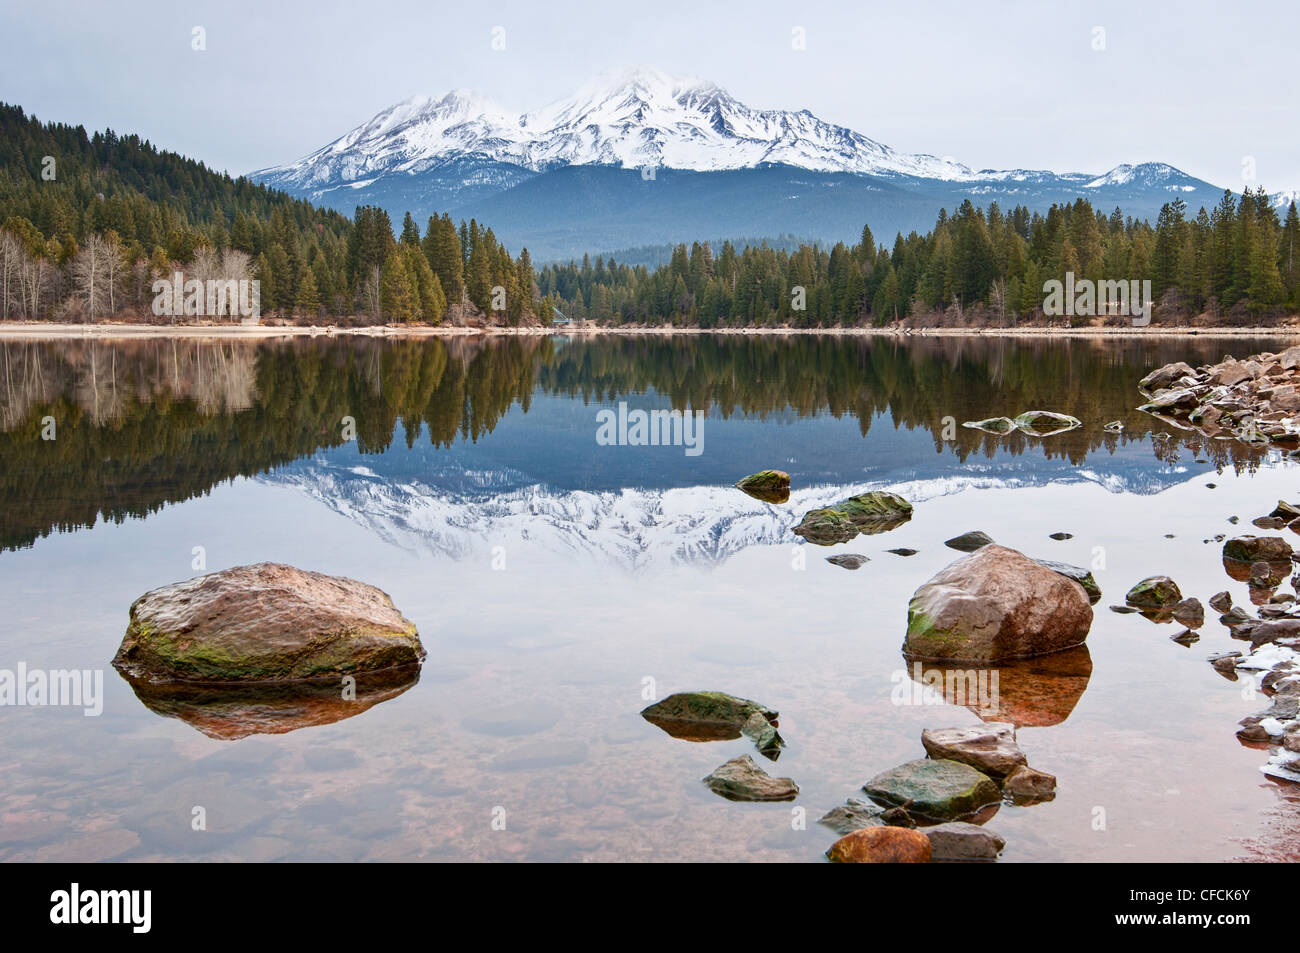 A dramatic view of Mount Shasta from Lake Siskiyou in California. Stock Photo